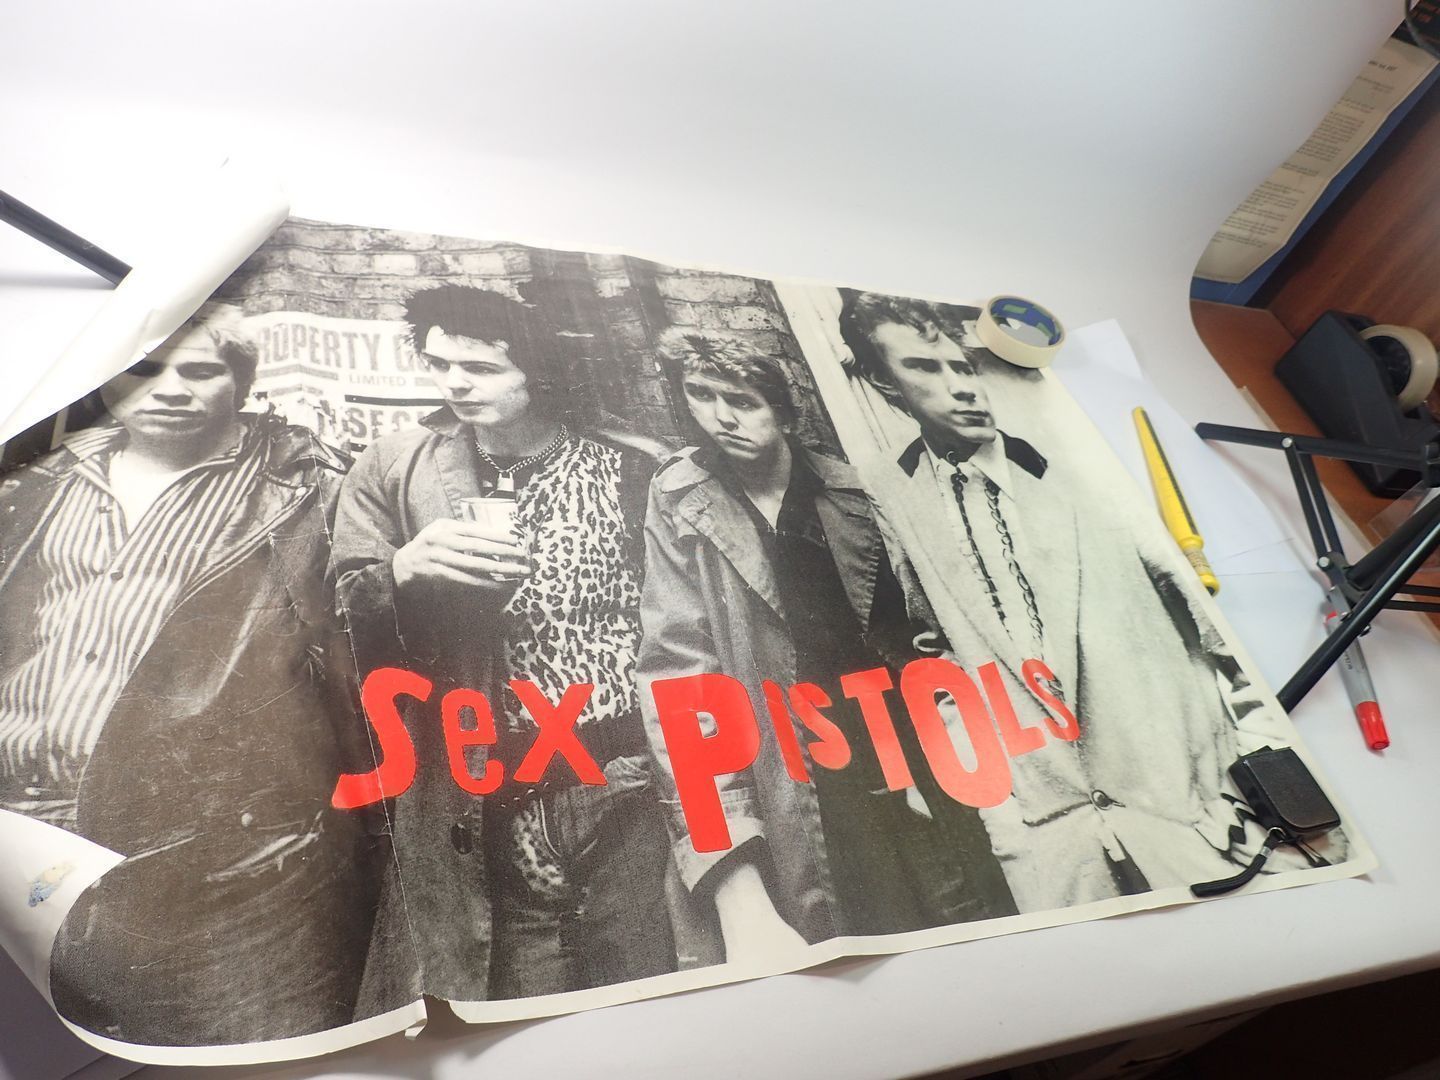 A collection of punk posters including Sex Pistols, largest 100 x 68.5cm - mixed condition - Image 8 of 8